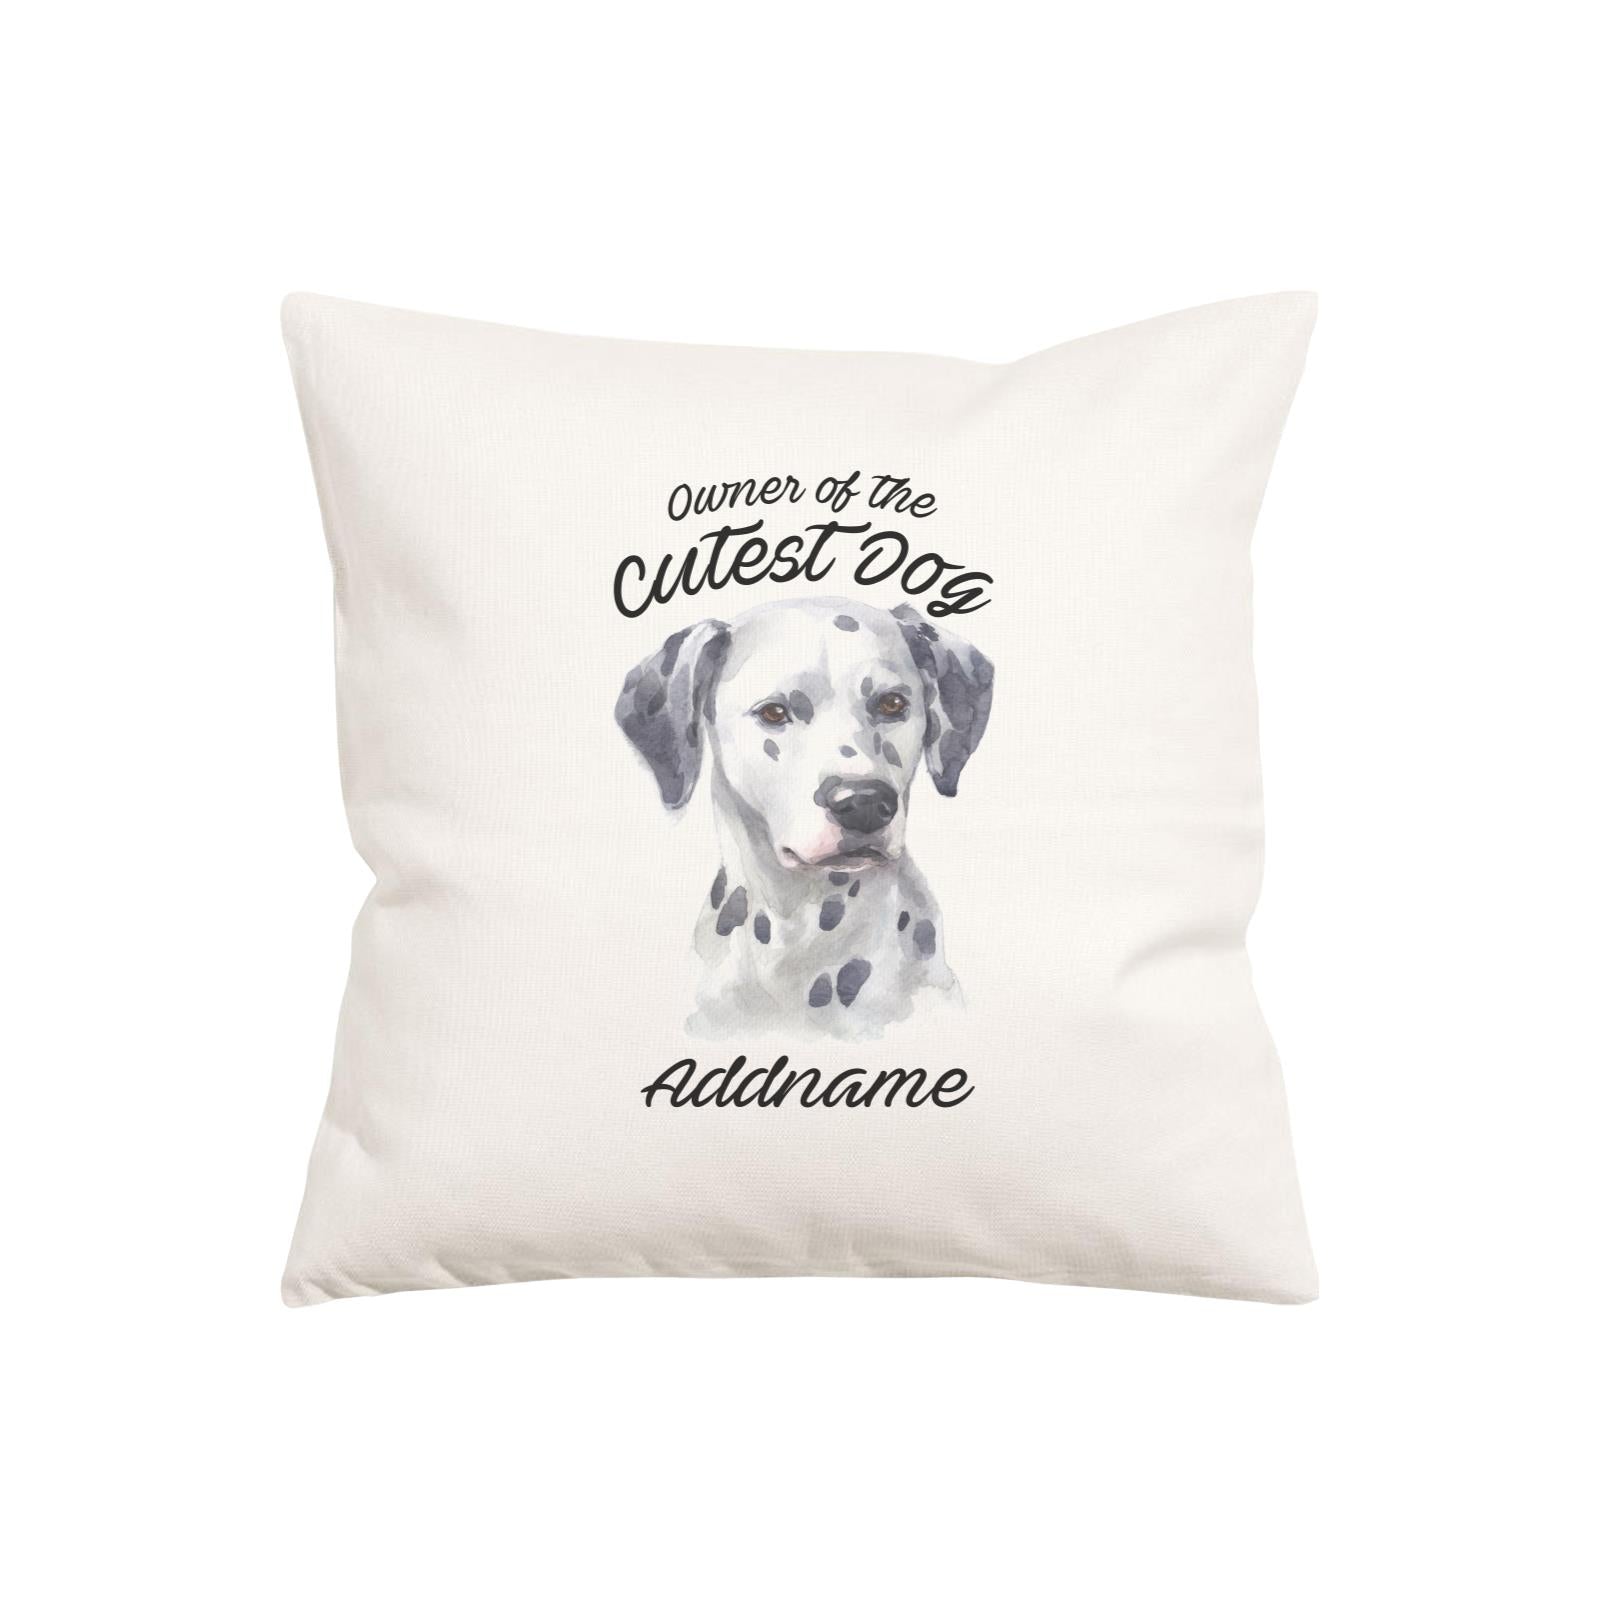 Watercolor Dog Owner Of The Cutest Dog Dalmatian Addname Pillow Cushion